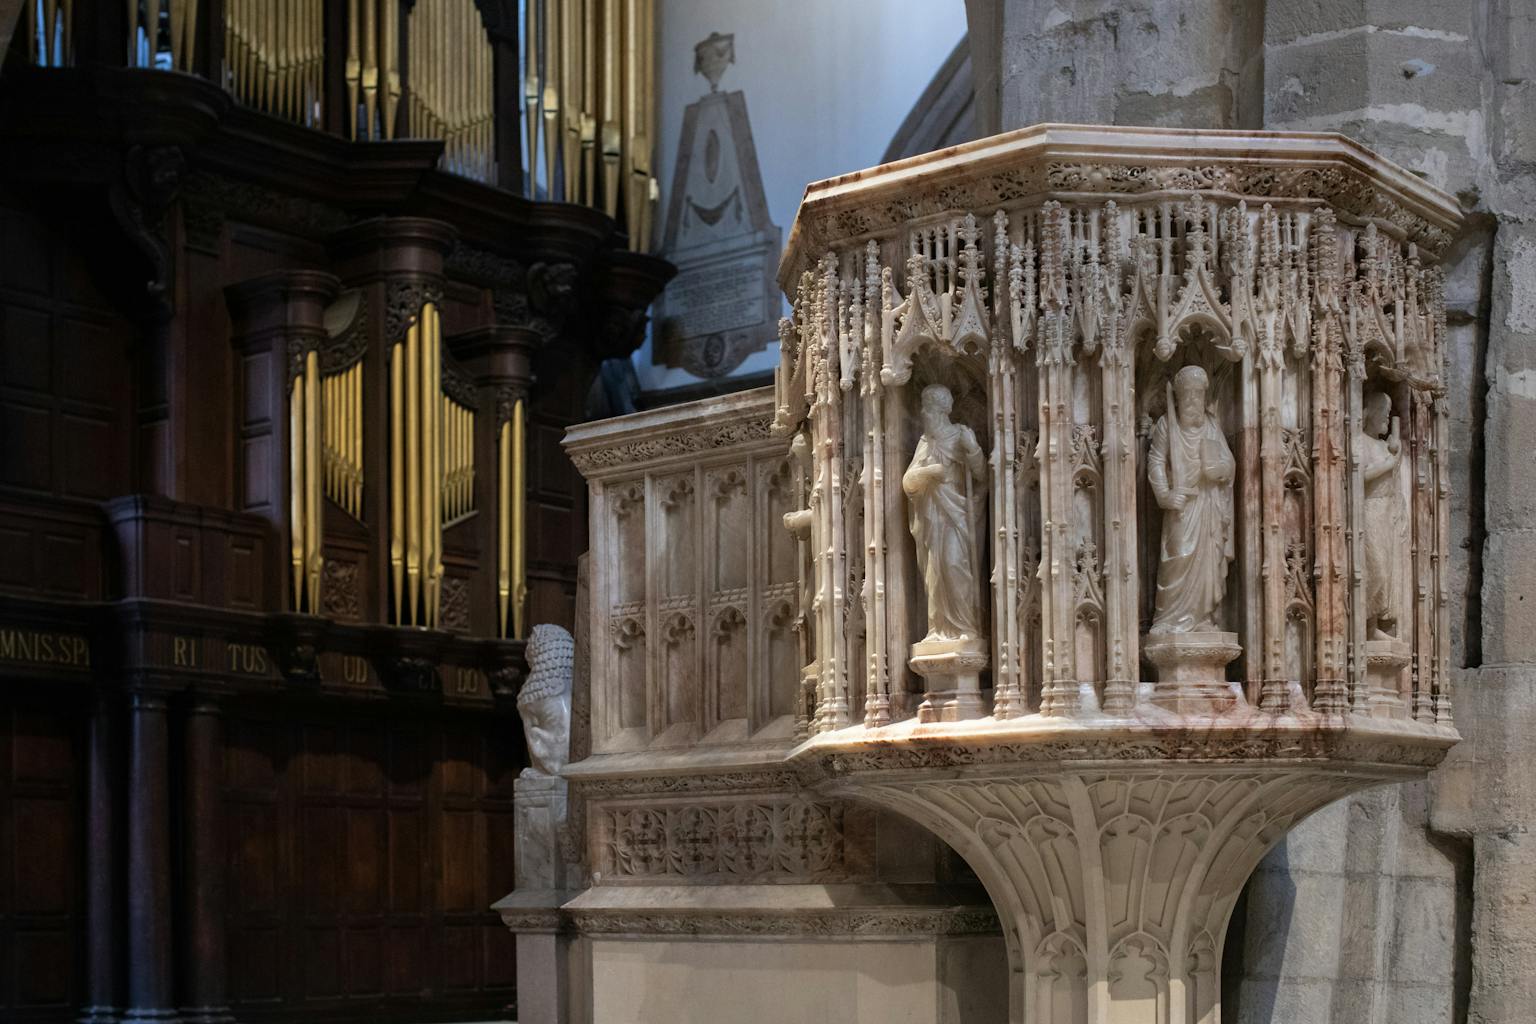 The pulpit at Newcastle Cathedral